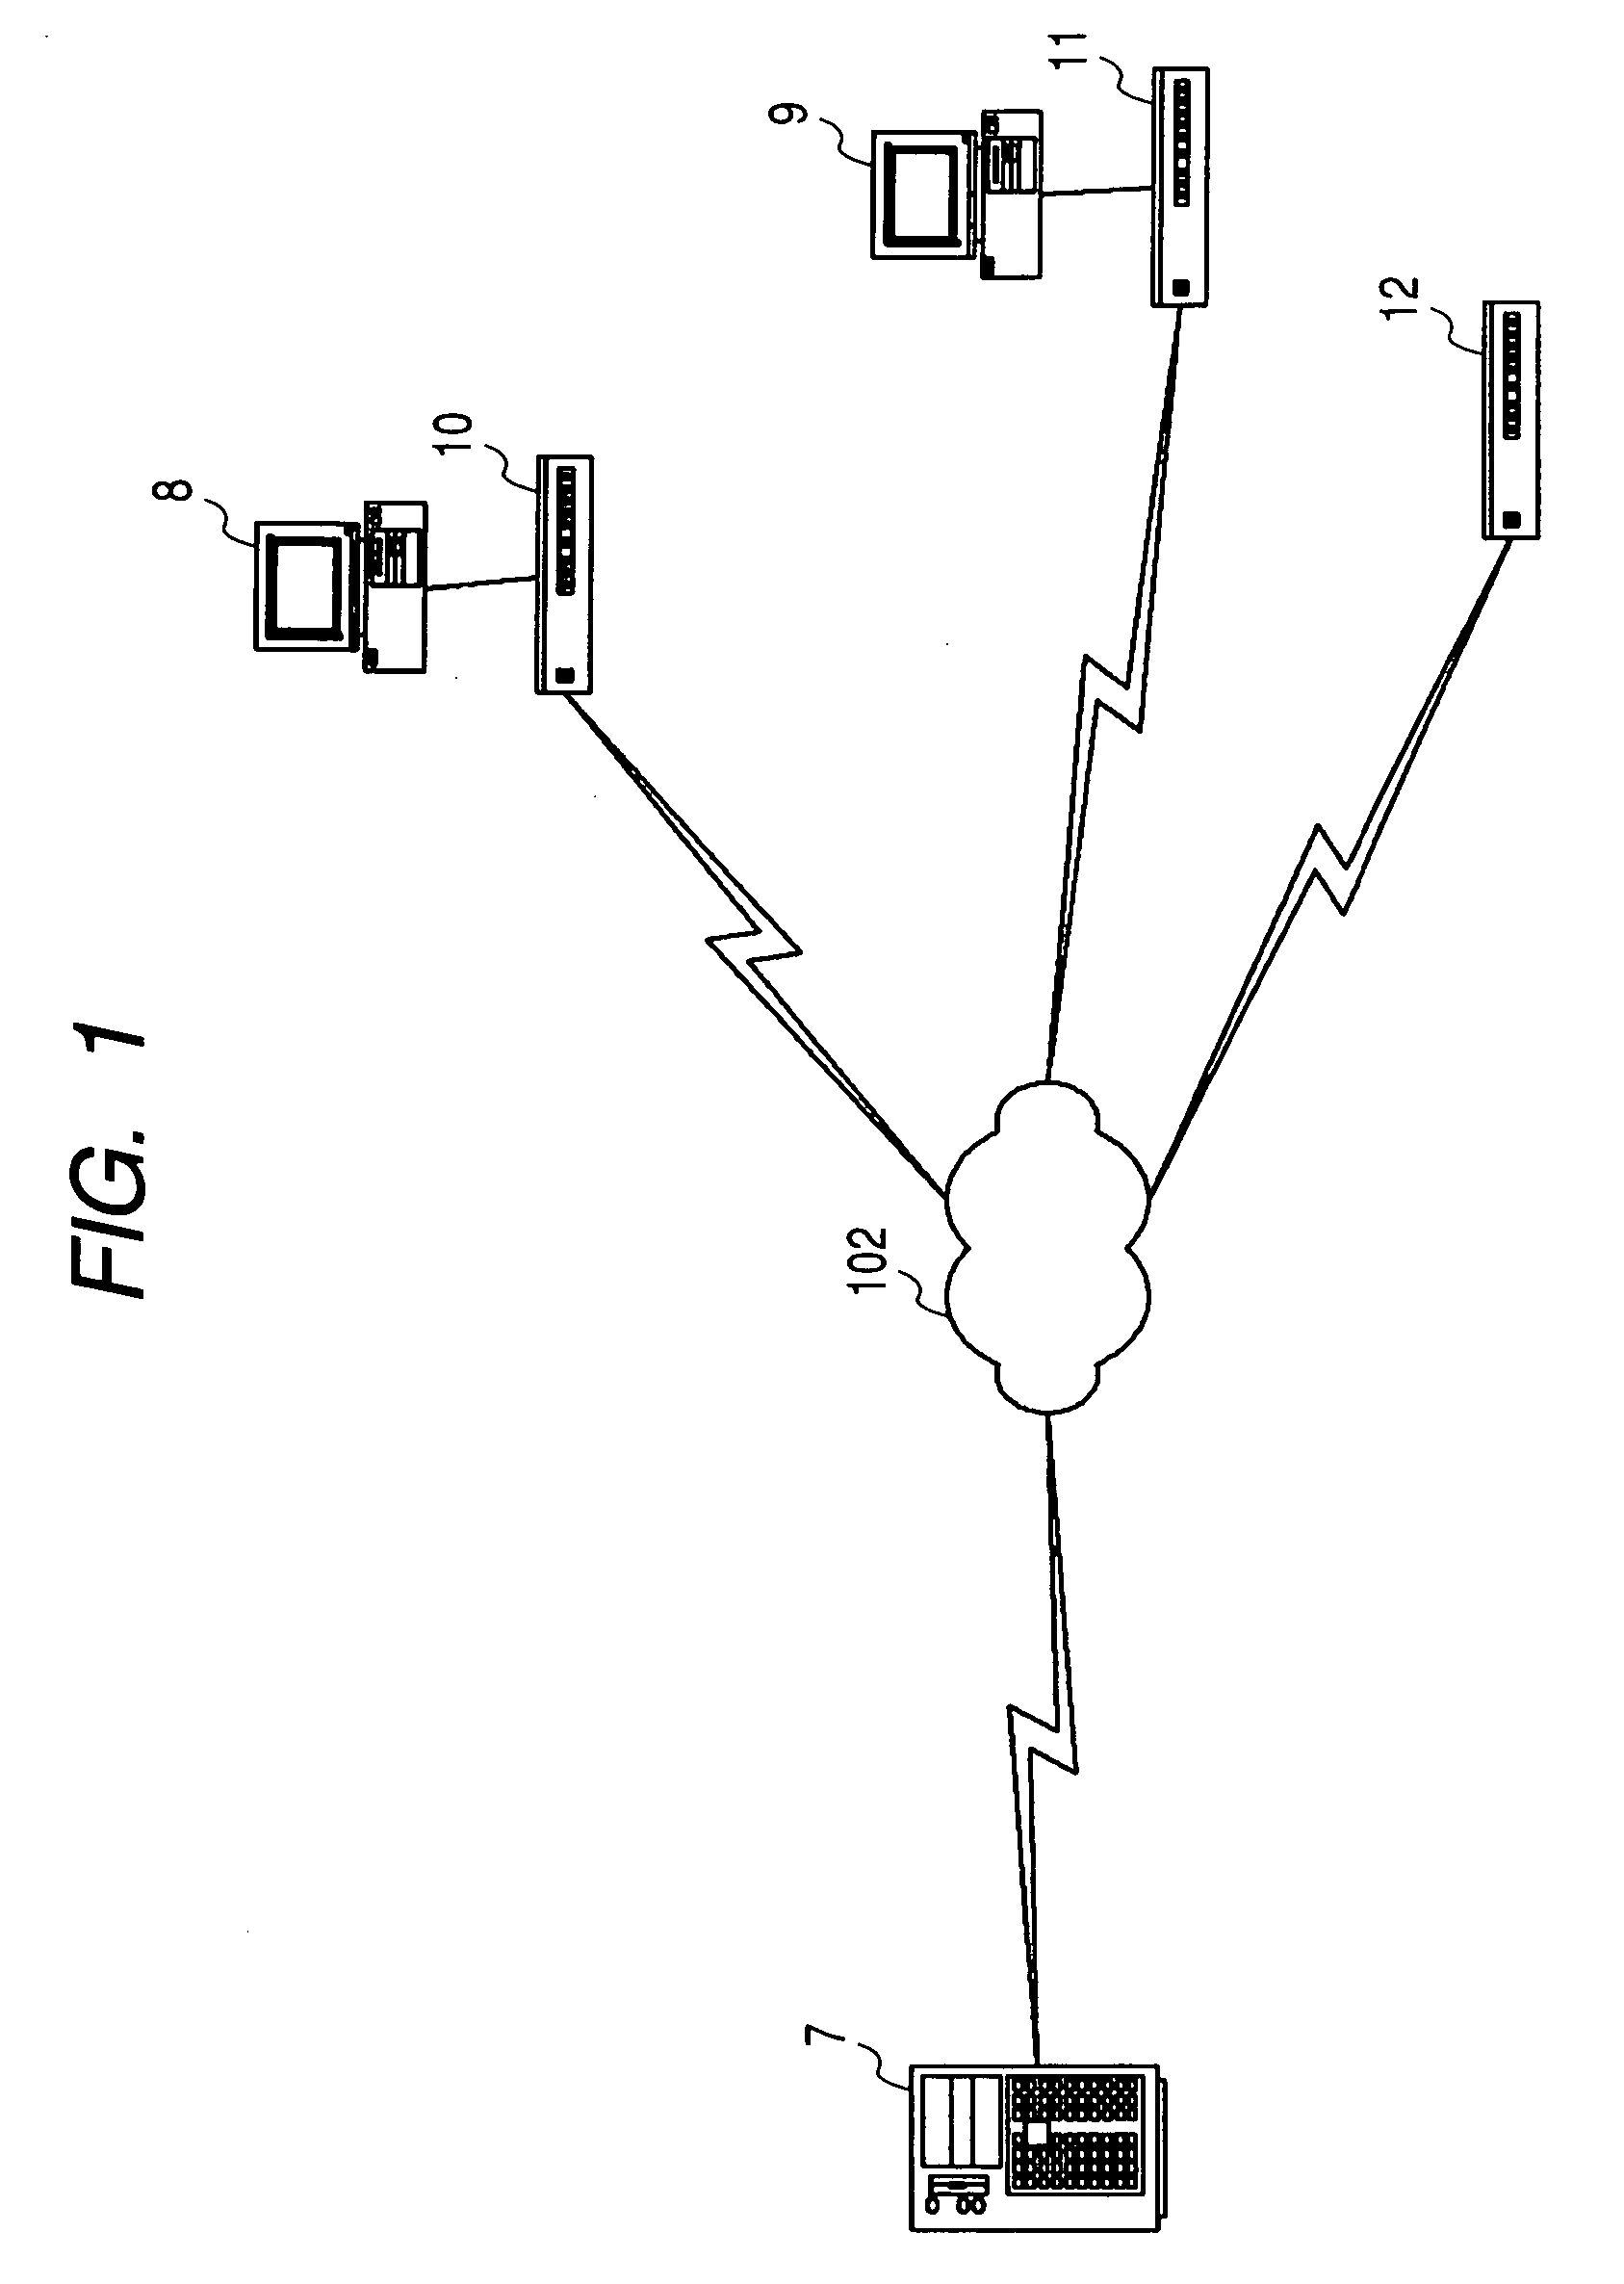 Packet analysis system